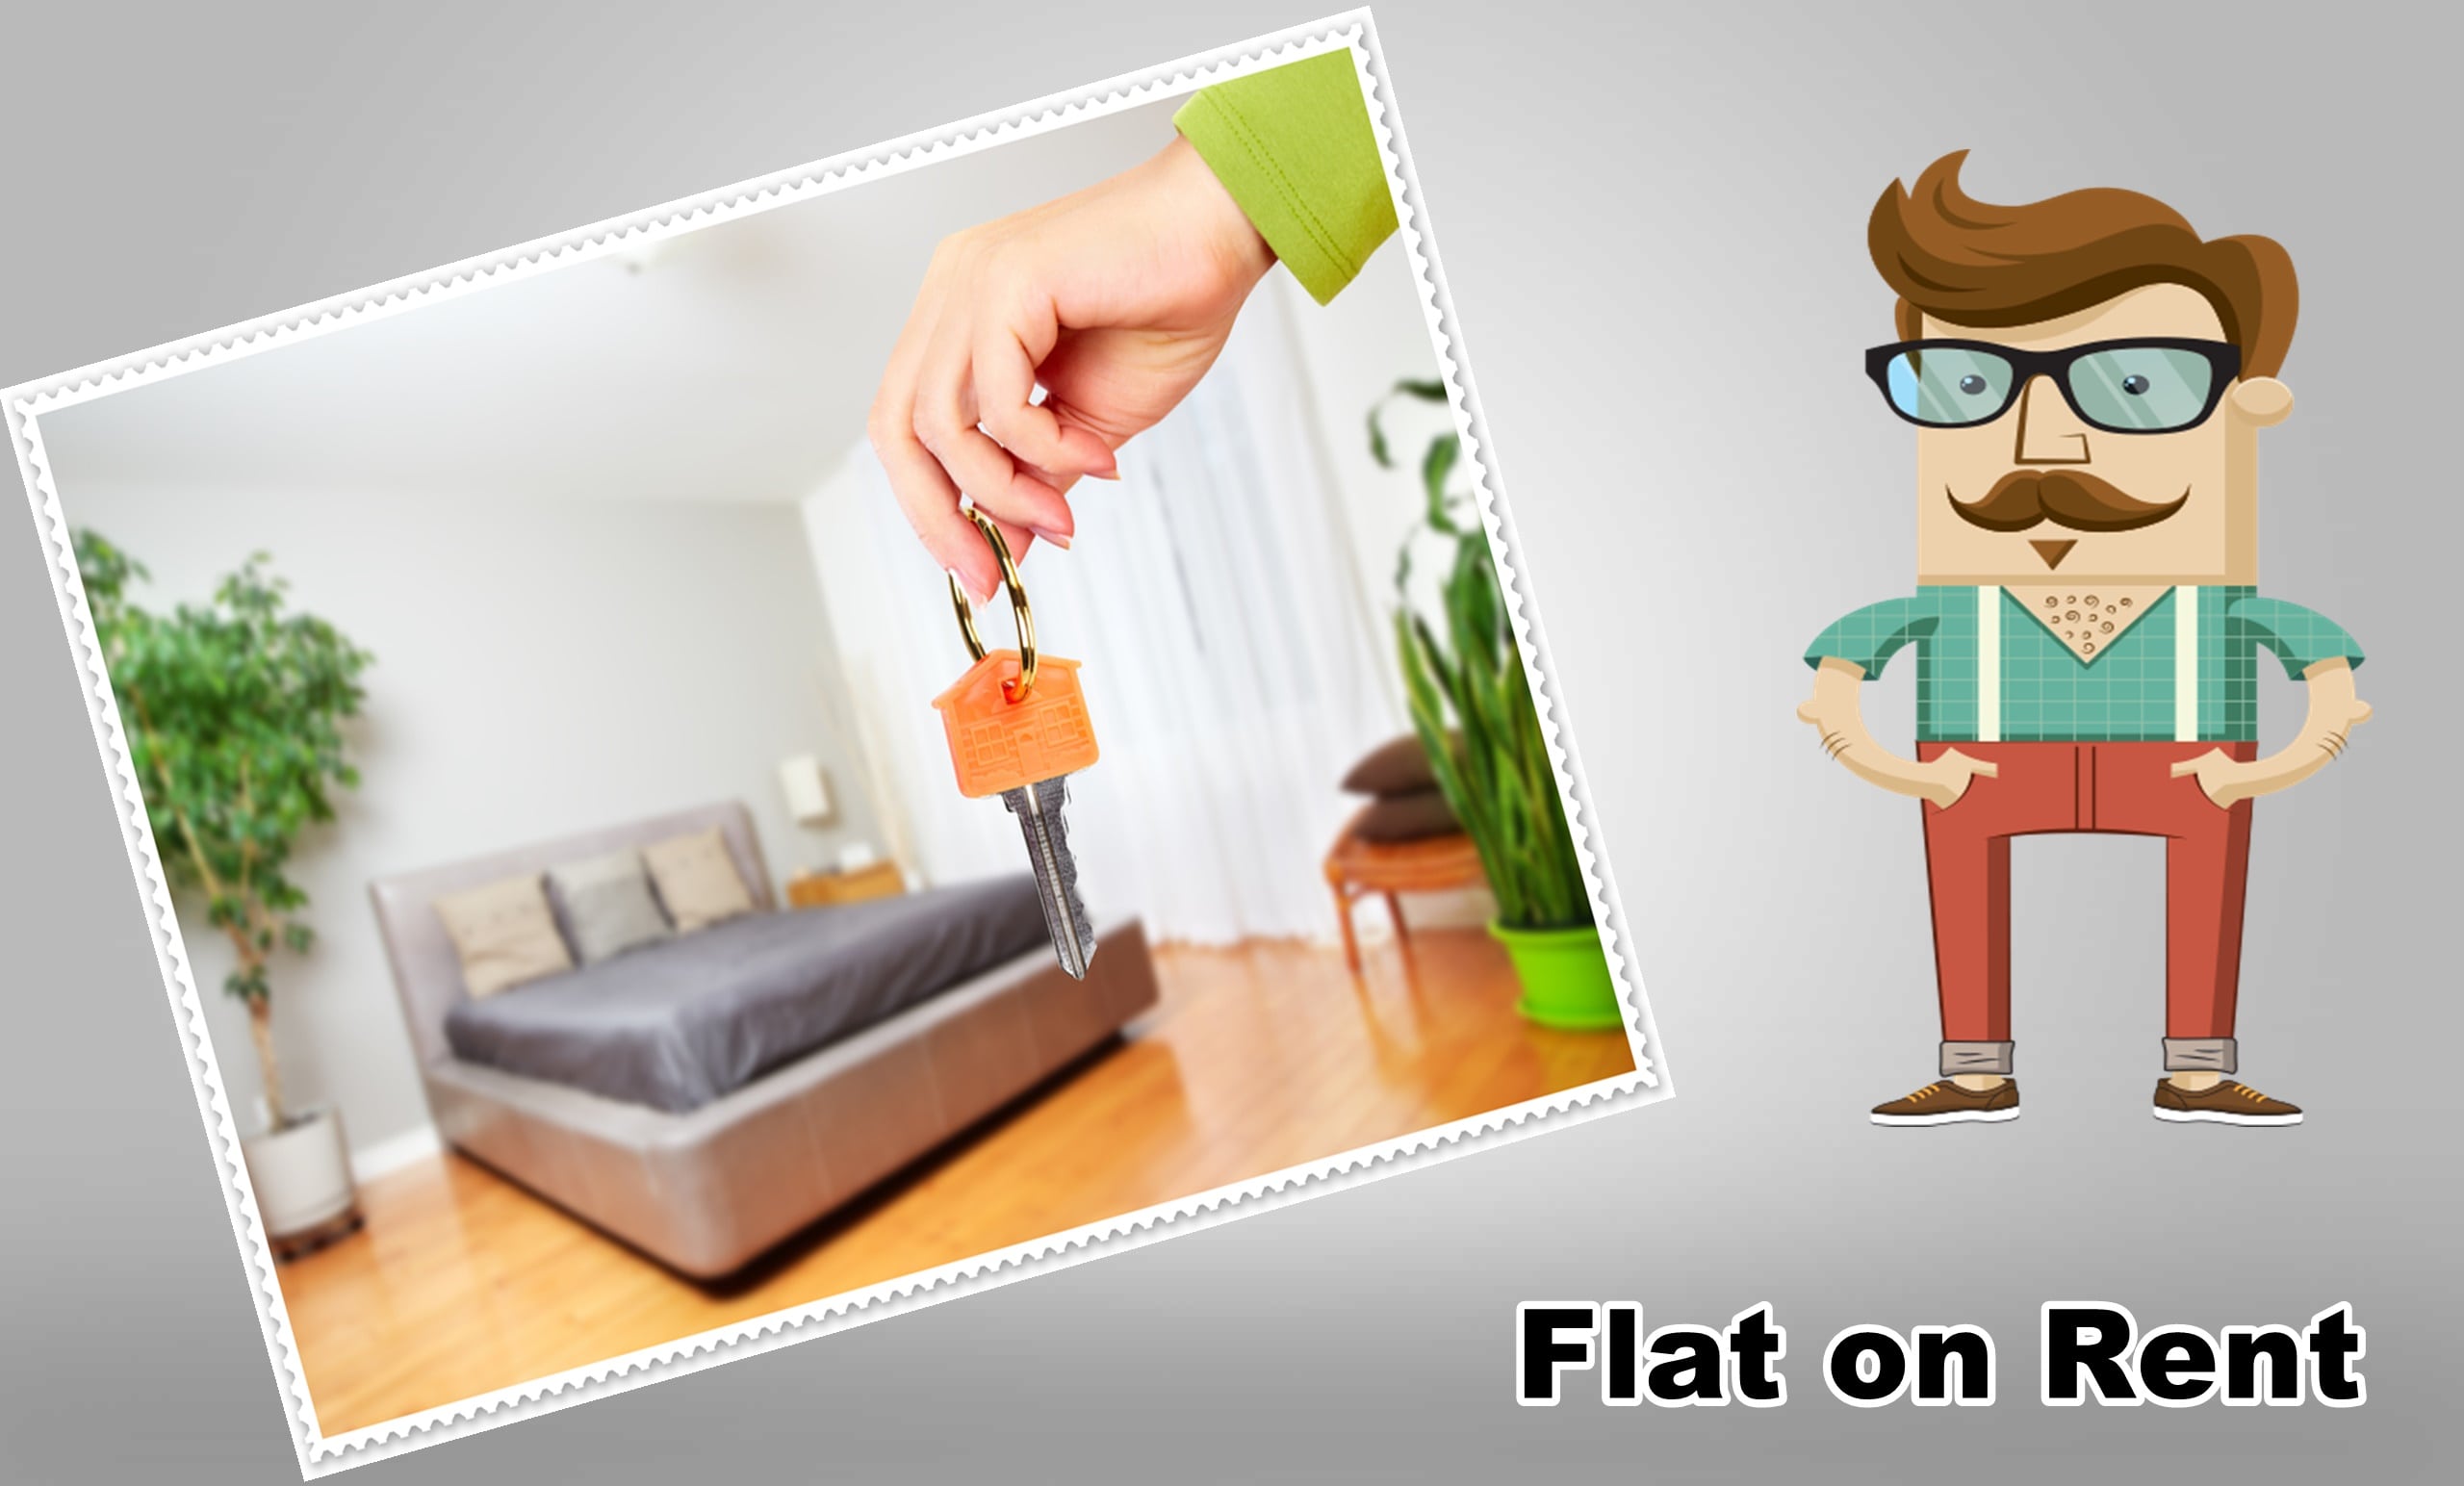 Come in flat. Flat to rent. Rent a Flat advertisement. Renting a Flat. Renting a Flat Dialogue.